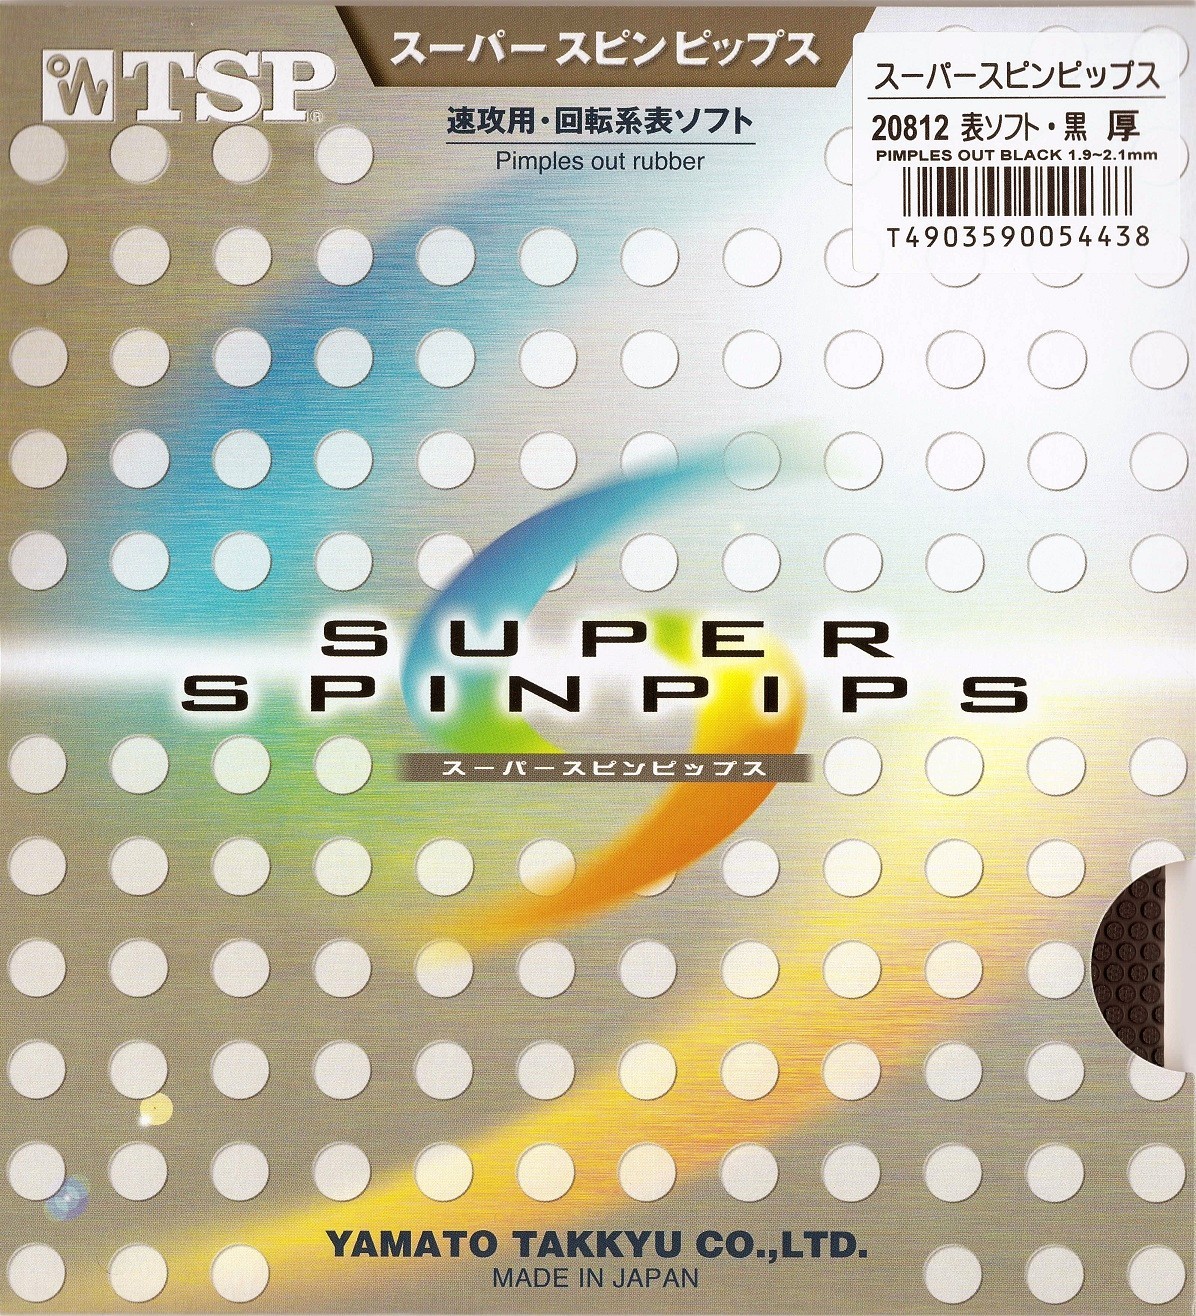 TSP Super Spinpips Table Tennis Rubber Sale 